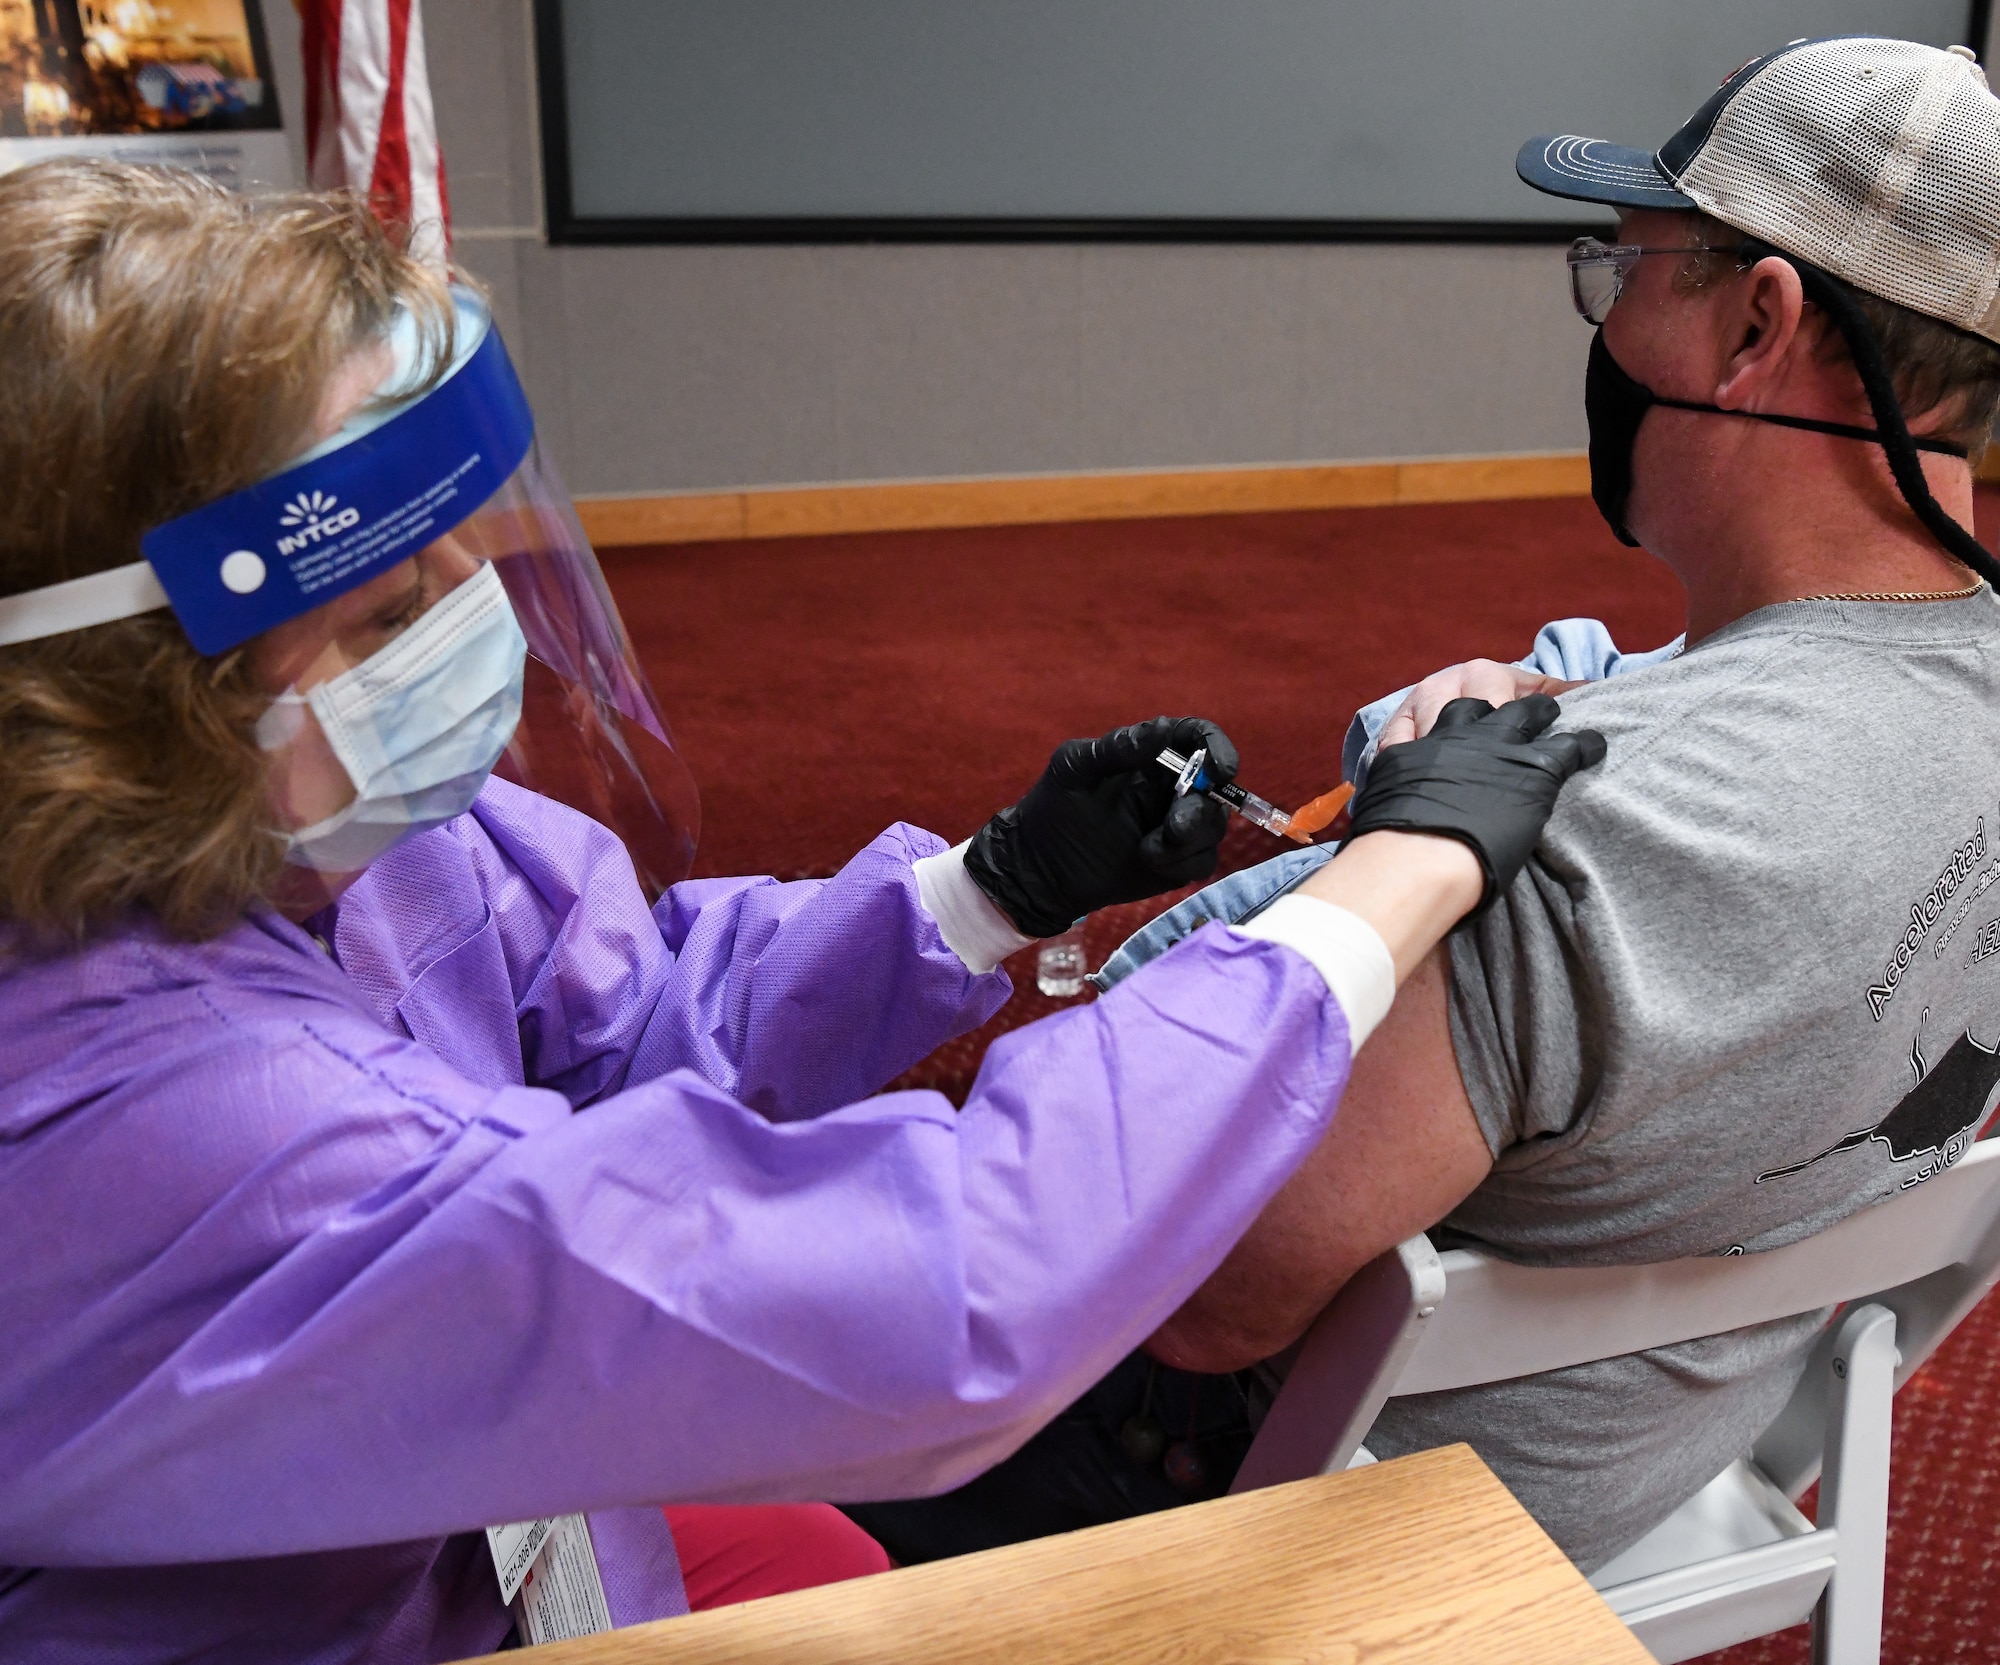 Tammie Litchford, a registered nurse with the Tullahoma office of the Coffee County Health Department, administers a flu vaccine to Charles Champion, a pipefitter at Arnold Air Force Base, Oct. 20, 2021, during a flu vaccine clinic held at Arnold AFB, Tenn. The clinic was conducted by the Coffee County Health Department with support from the Arnold AFB Medical Aid Station for individuals with access to the base. During the clinic, 141 individuals were vaccinated. (U.S. Air Force photo by Jill Pickett)